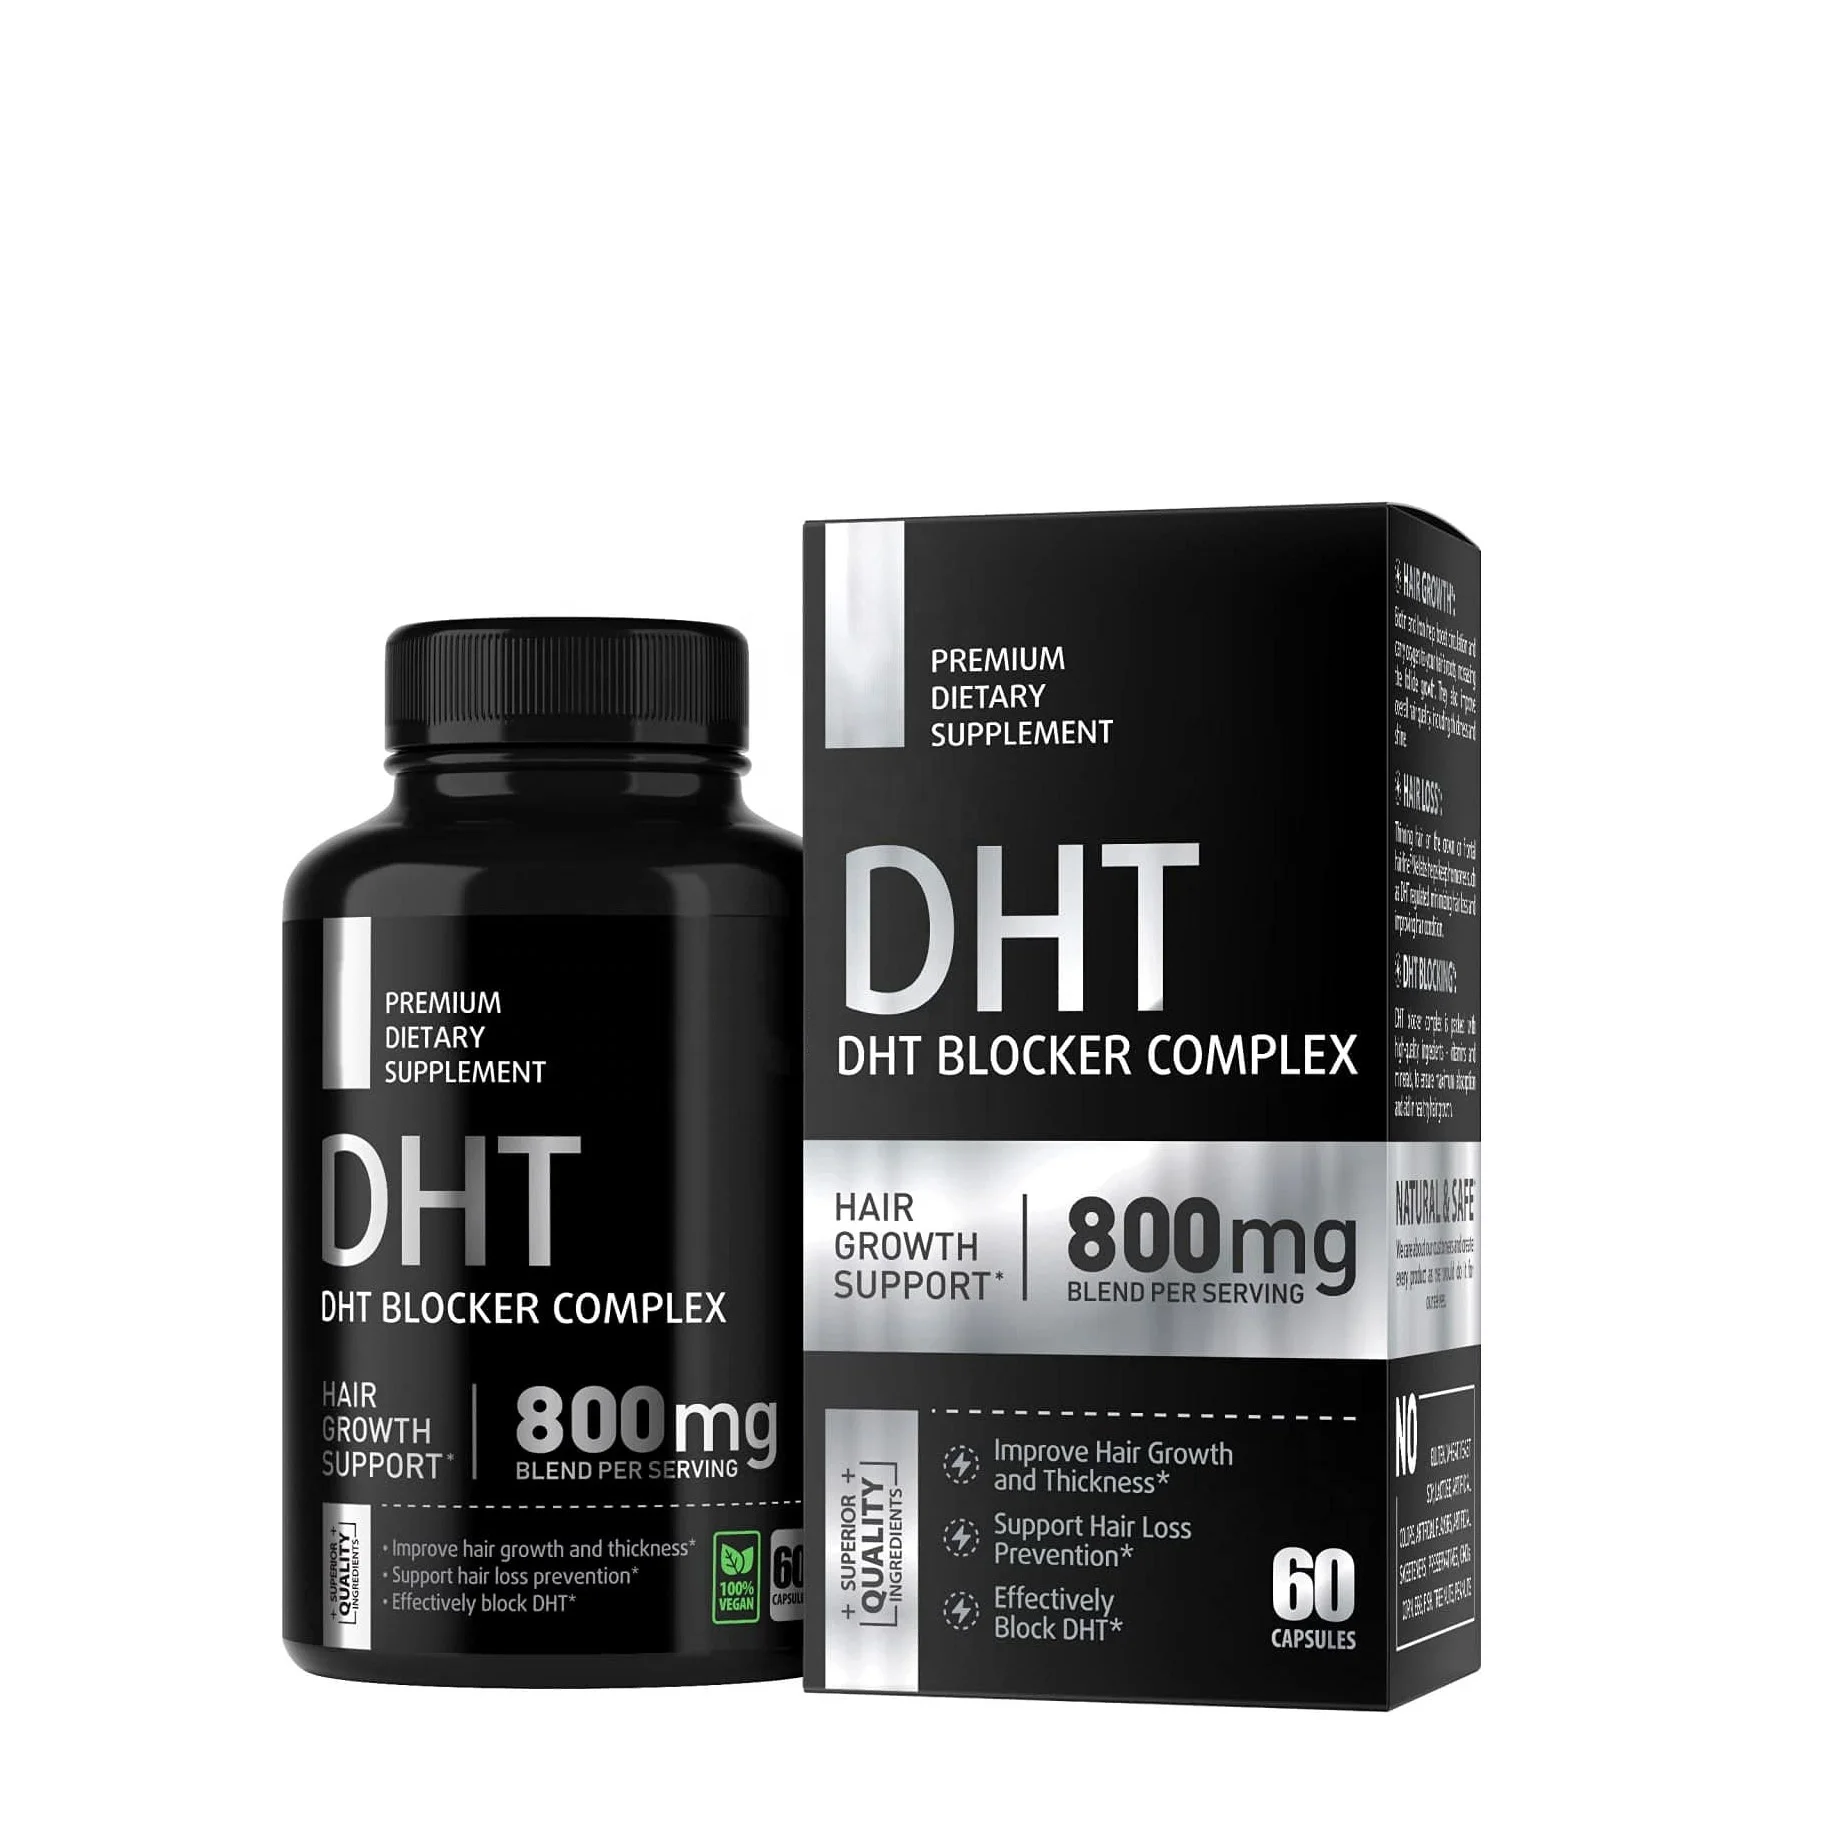 Dht Blocker Hair Growth Supplement Reduce Hair Loss & Regrow Hair With Saw  Palmetto & Biotin - Prostate Health Support - Buy Dht Blocker,Dht Blocker  Supplementen,Dht Product on 